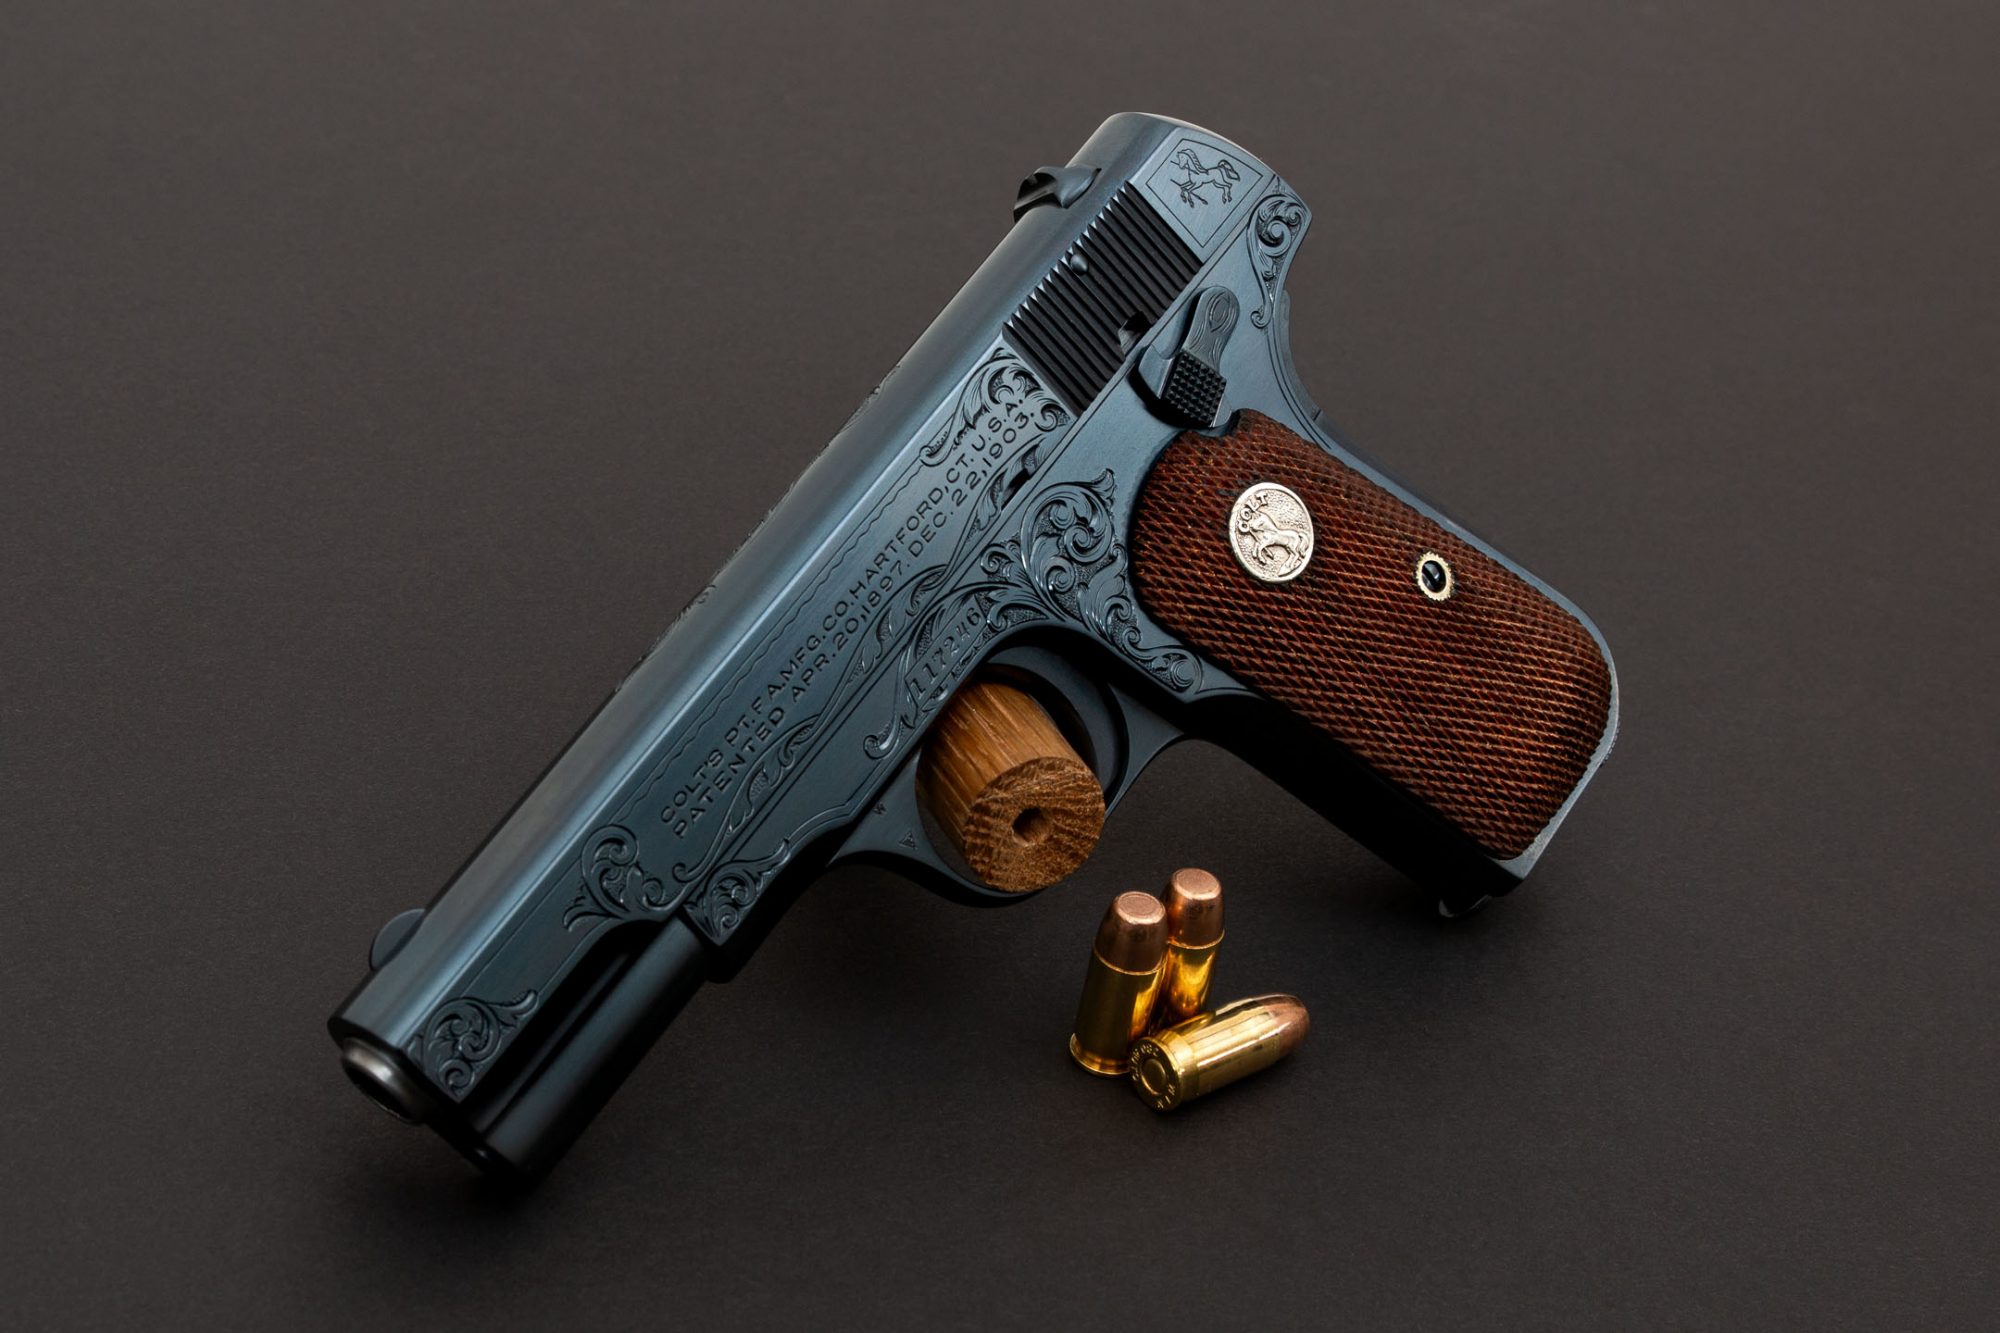 Colt 1908 Pocket Hammerless pistol from 1935, restored and engraved by Turnbull Restoration Co. of Bloomfield, NY